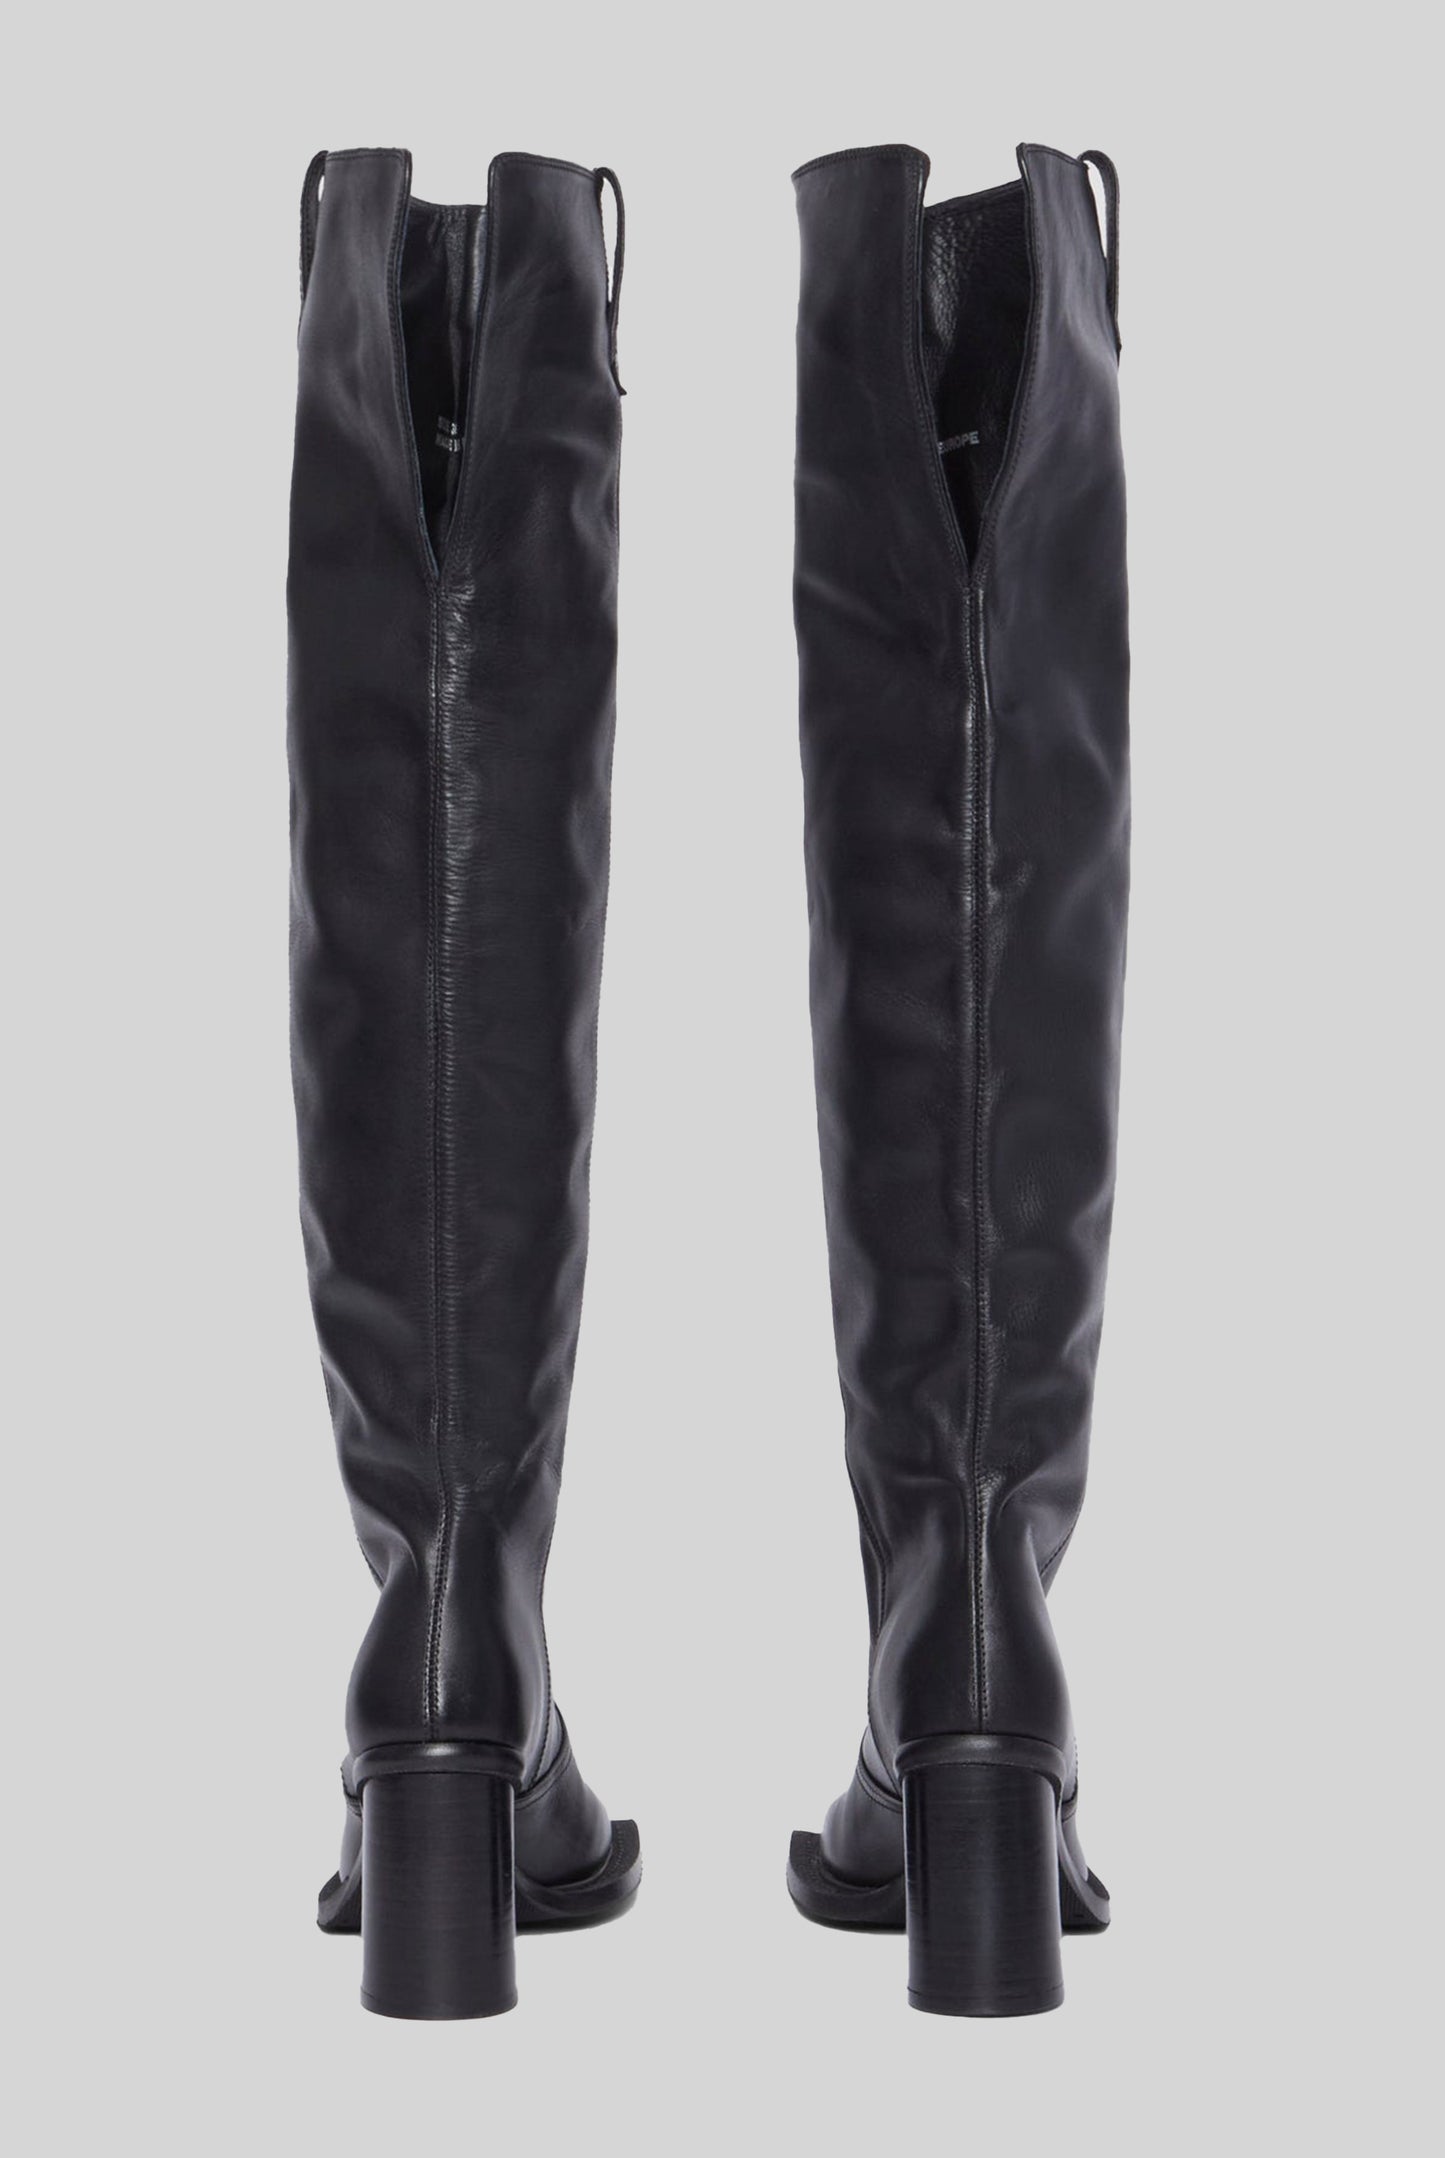 Howling Knee High Boots in Black